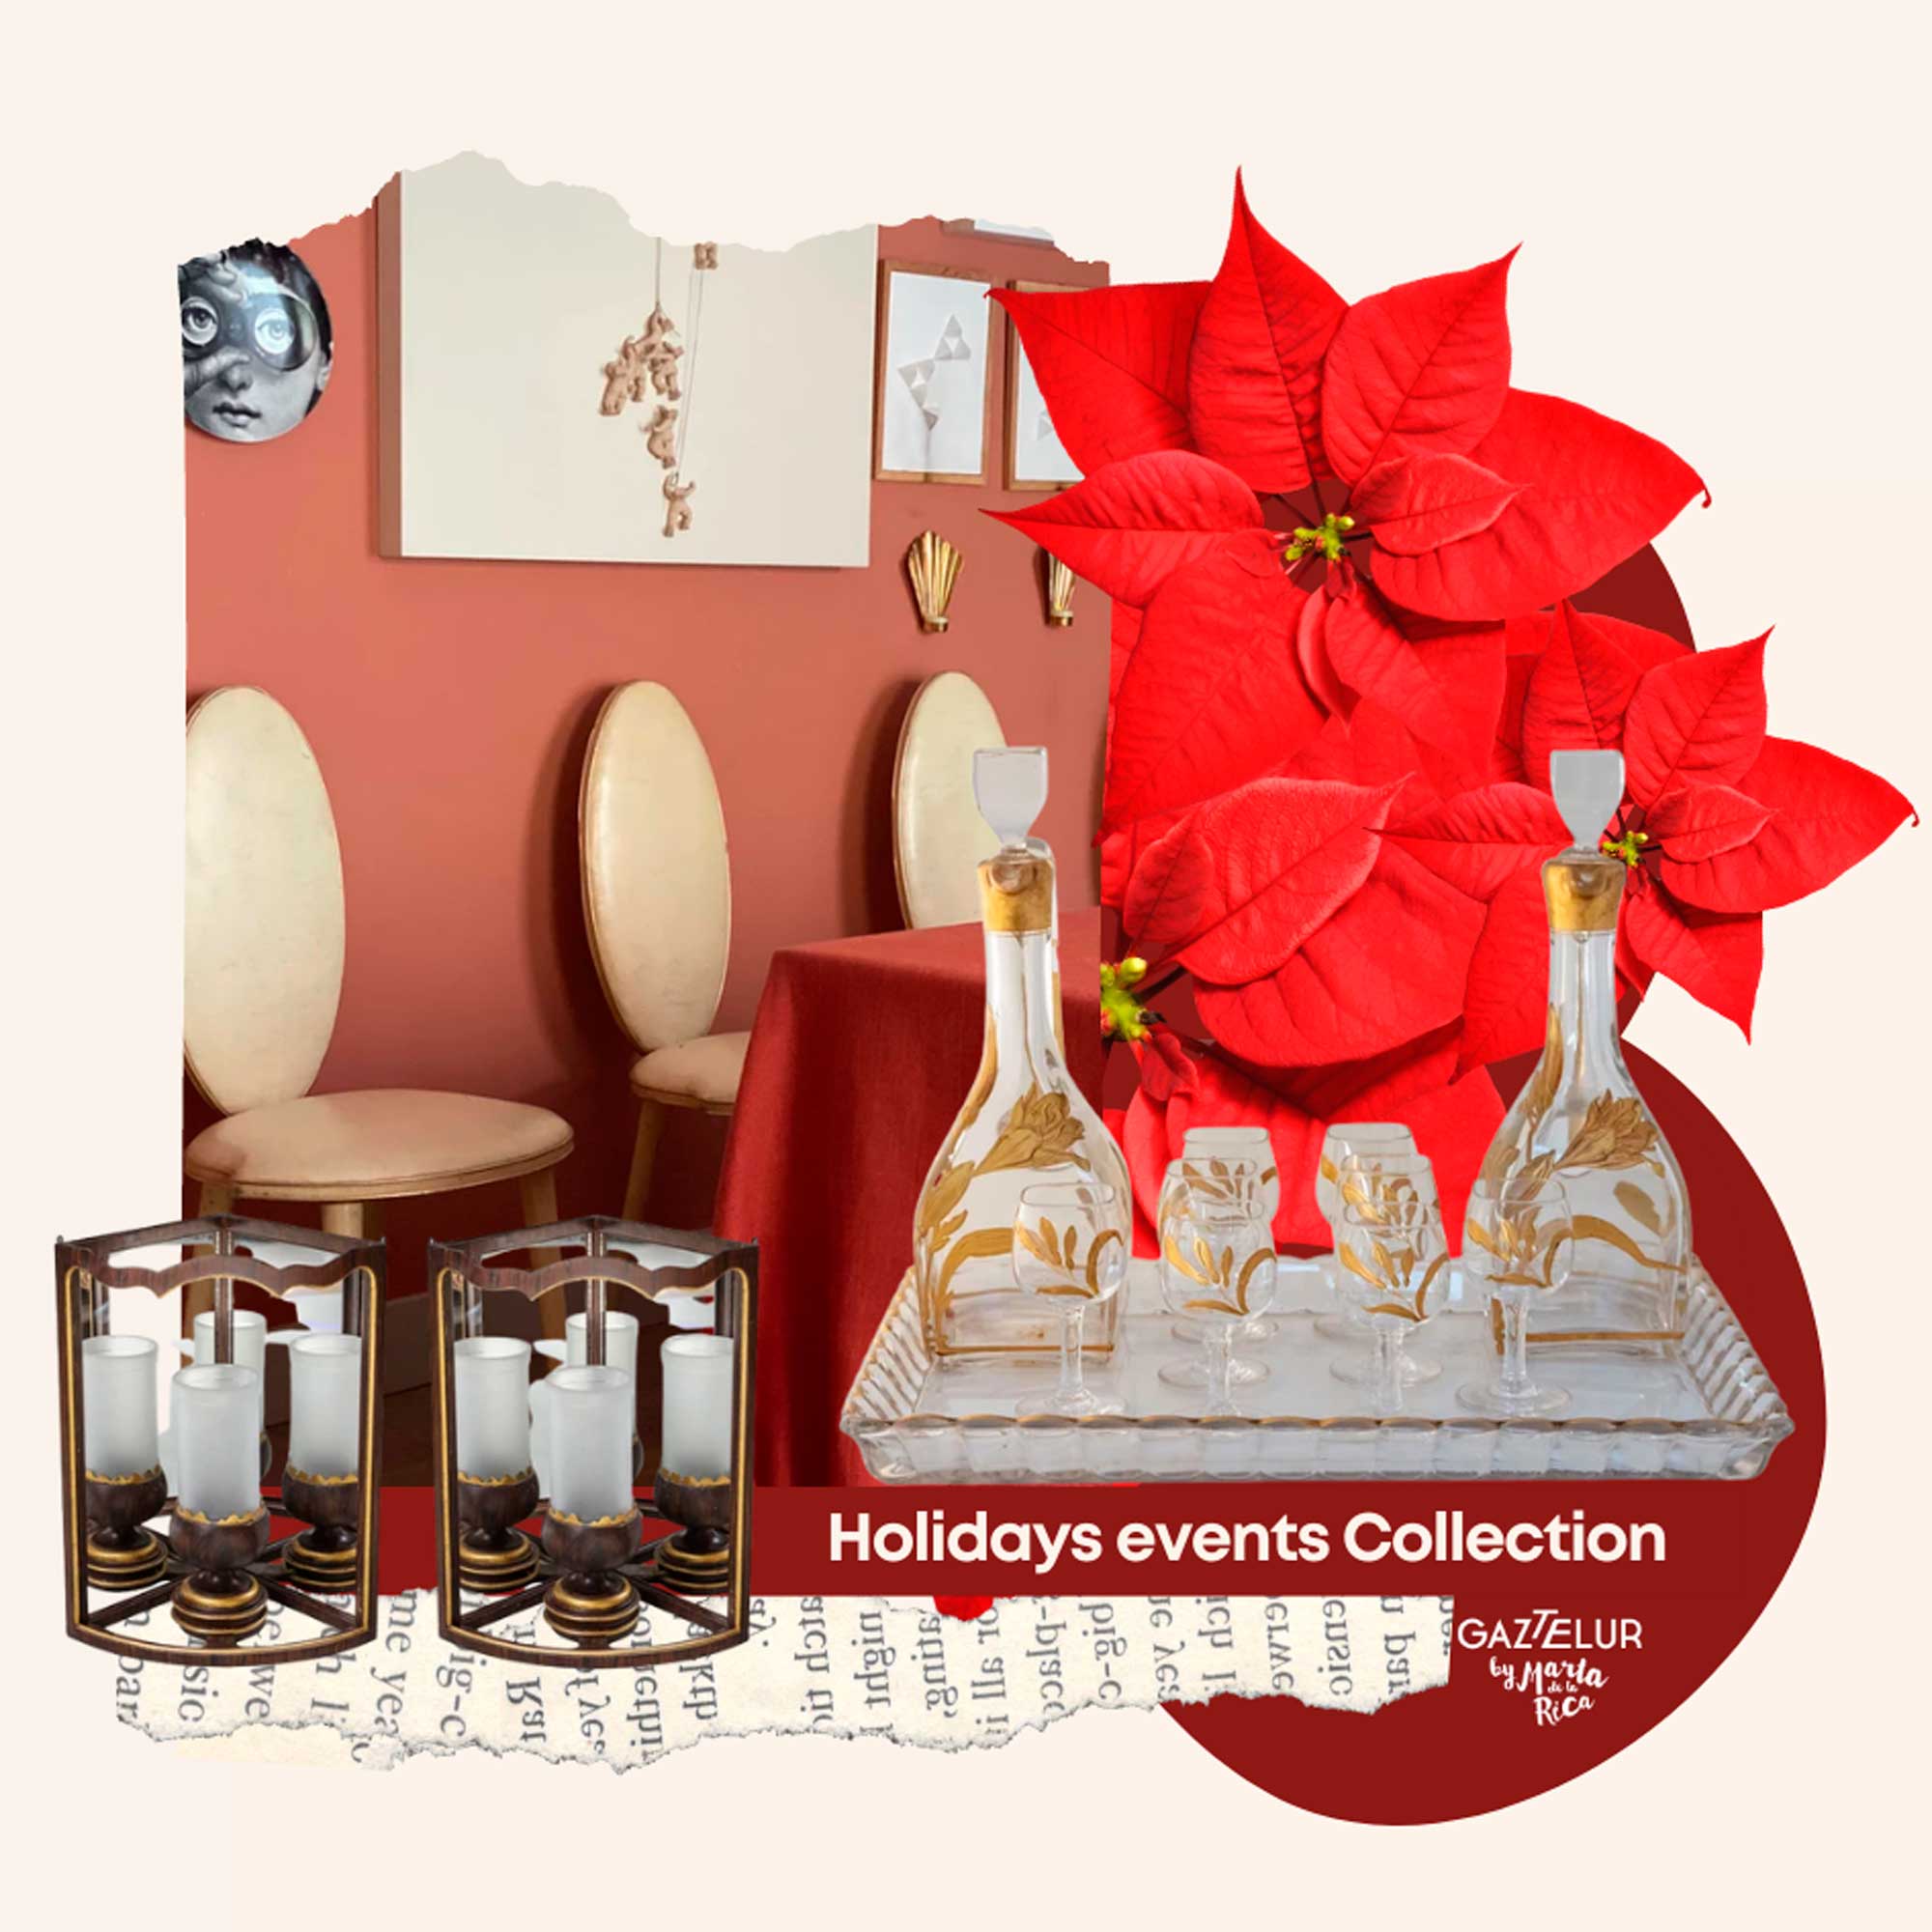 HOLIDAYS EVENTS COLLECTION